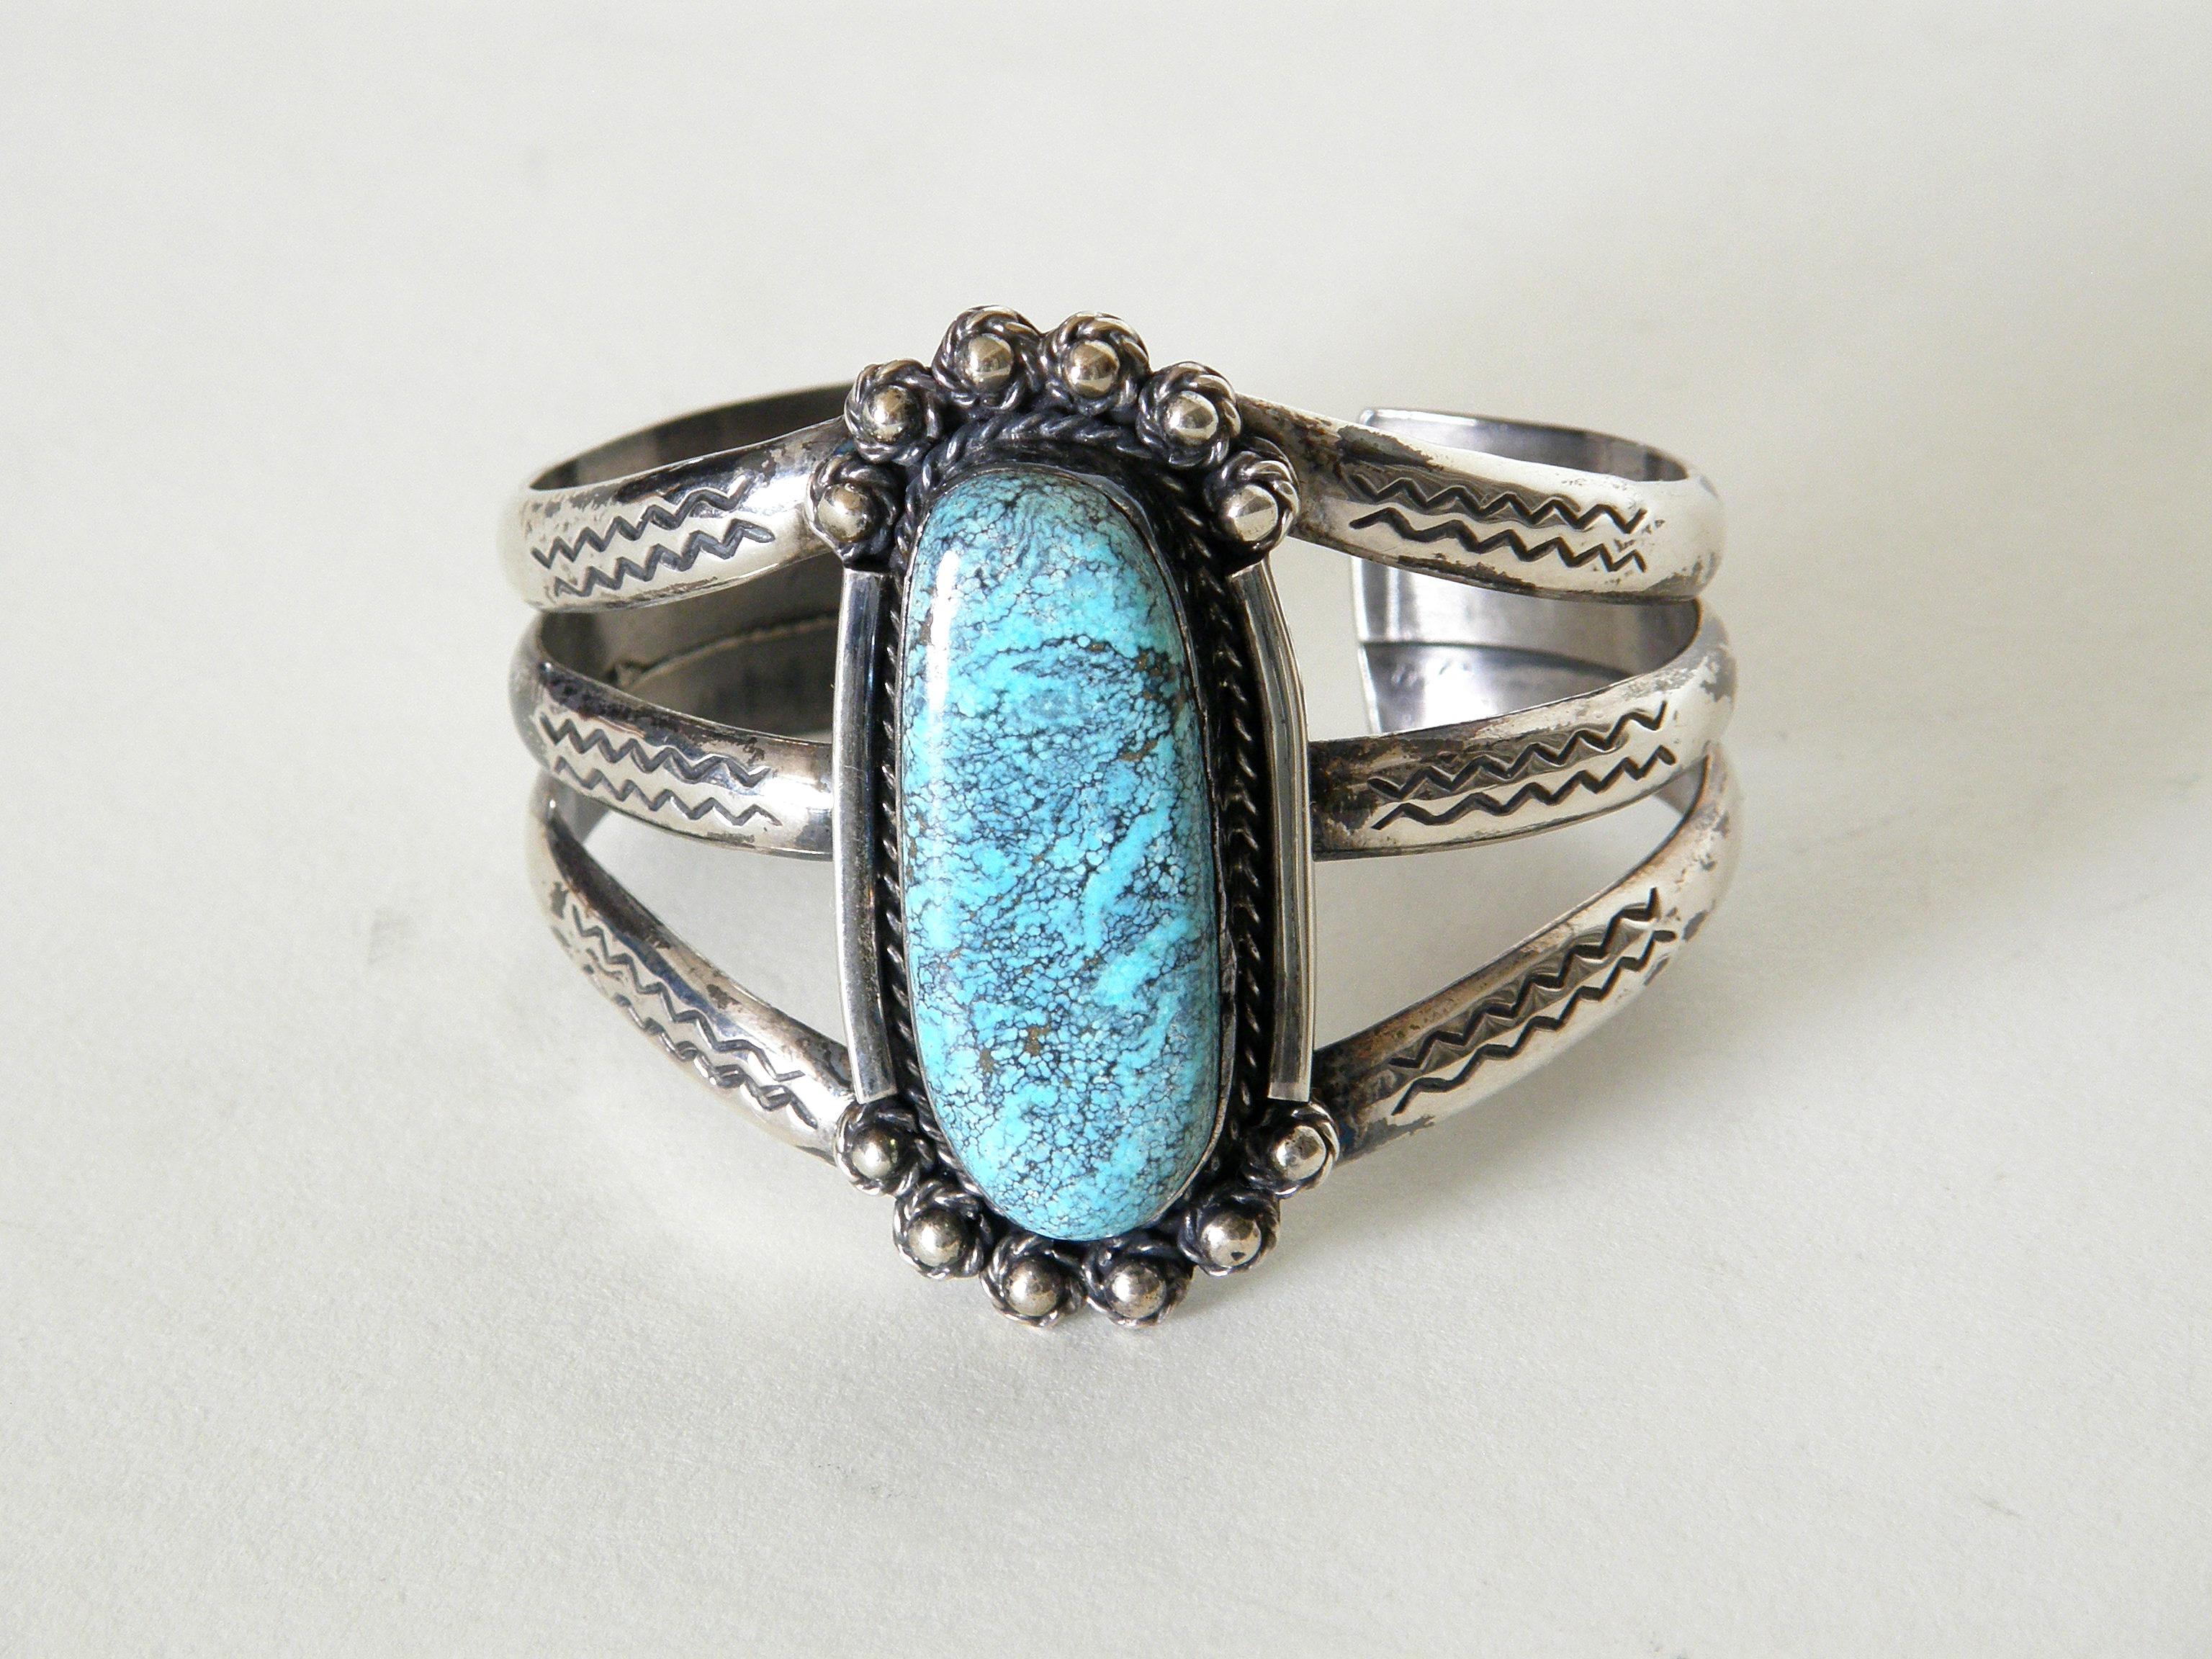 This Native American sterling cuff bracelet features a lovely, light blue turquoise stone with a fine, dark matrix that has some scattered, coppery highlights. It has an irregular, elongated oval shape, and the thick stone sits high in its bezel